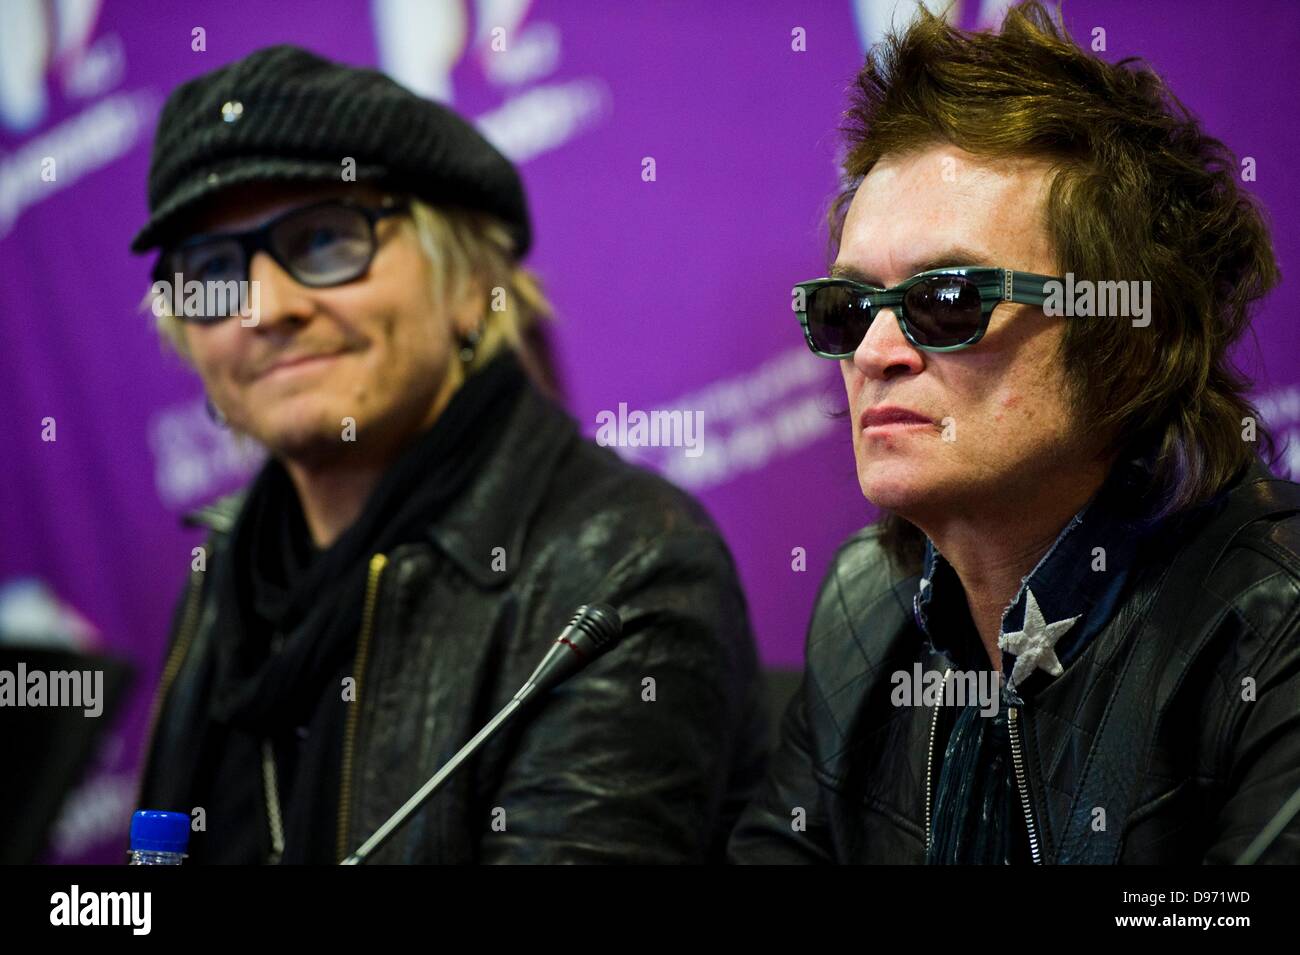 Johannesburg, South Africa. June 12, 2013.  Matt Sorum and Glen Hughes at the Jacaranda FM studios on June 12, 2013, in Johannesburg, South Africa. Kings of Chaos performed in Cape Town on June 8, 2013 and are set to perform in Johannesburg on June 15 and 16, 2013. Credit:  Gallo images/Alamy Live News Stock Photo